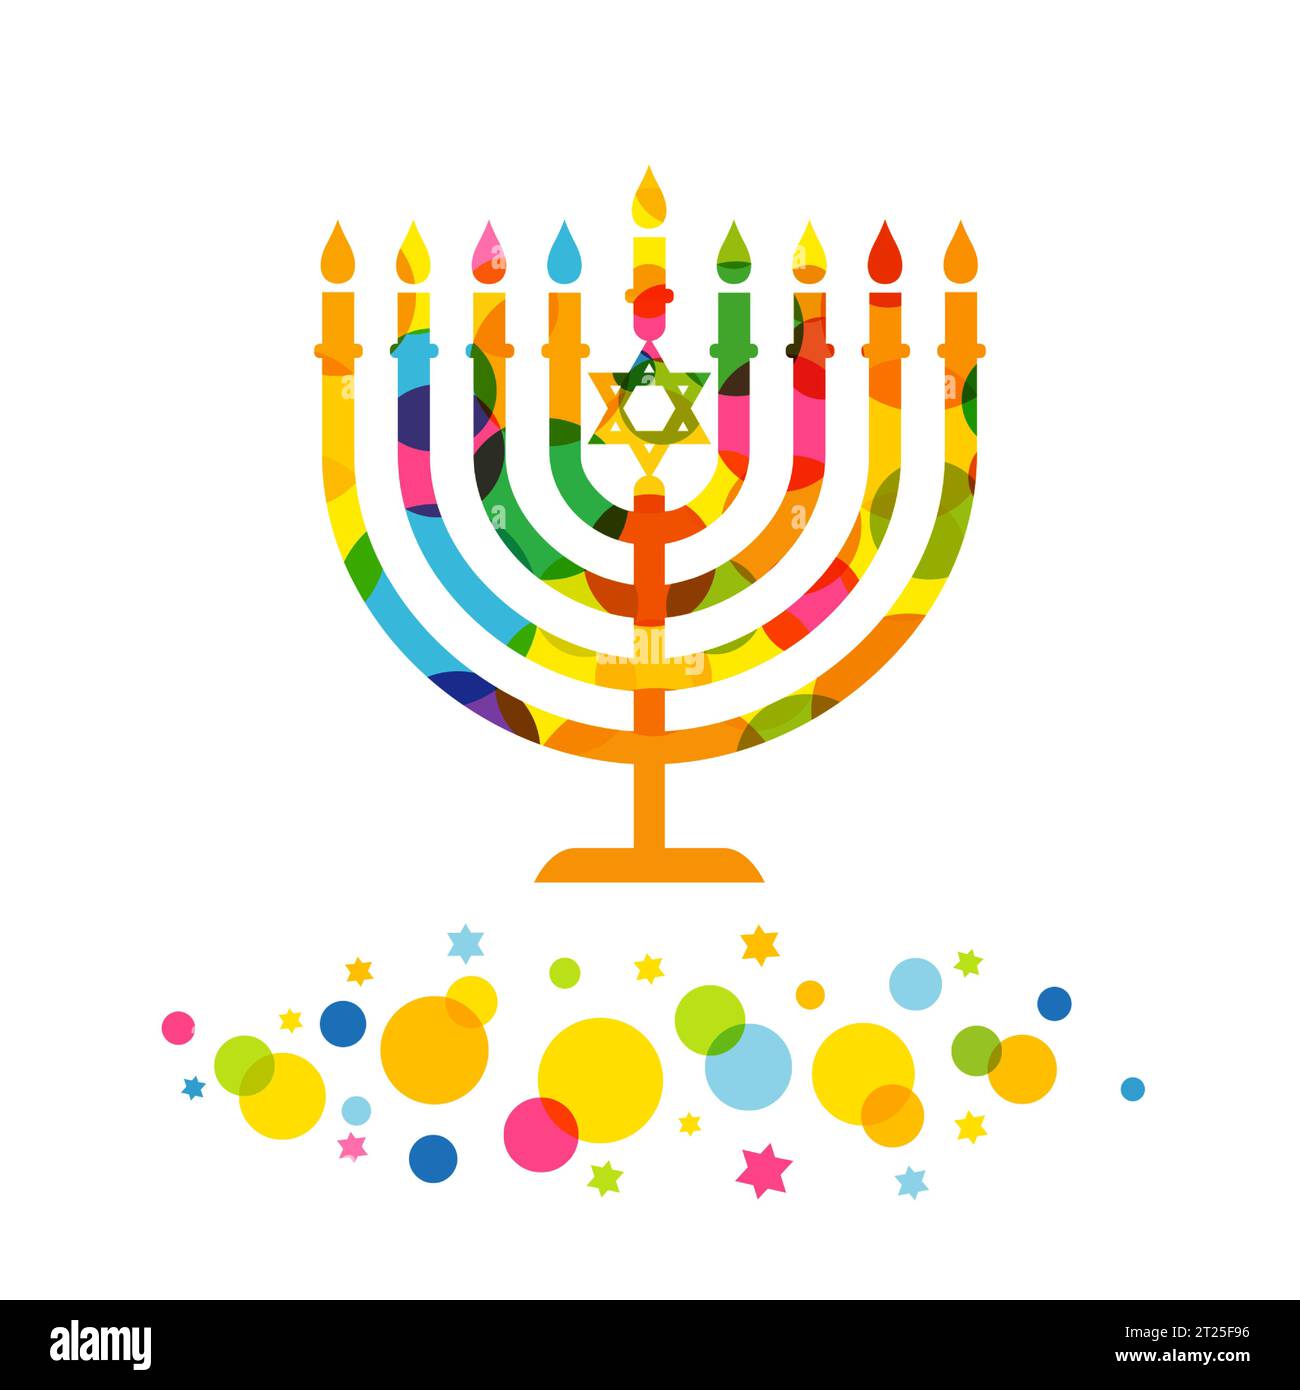 Colorful hanukkah menorah with colored confetti and stars. Jewish festival of lights, menora candle icon. Vector illustration Stock Vector